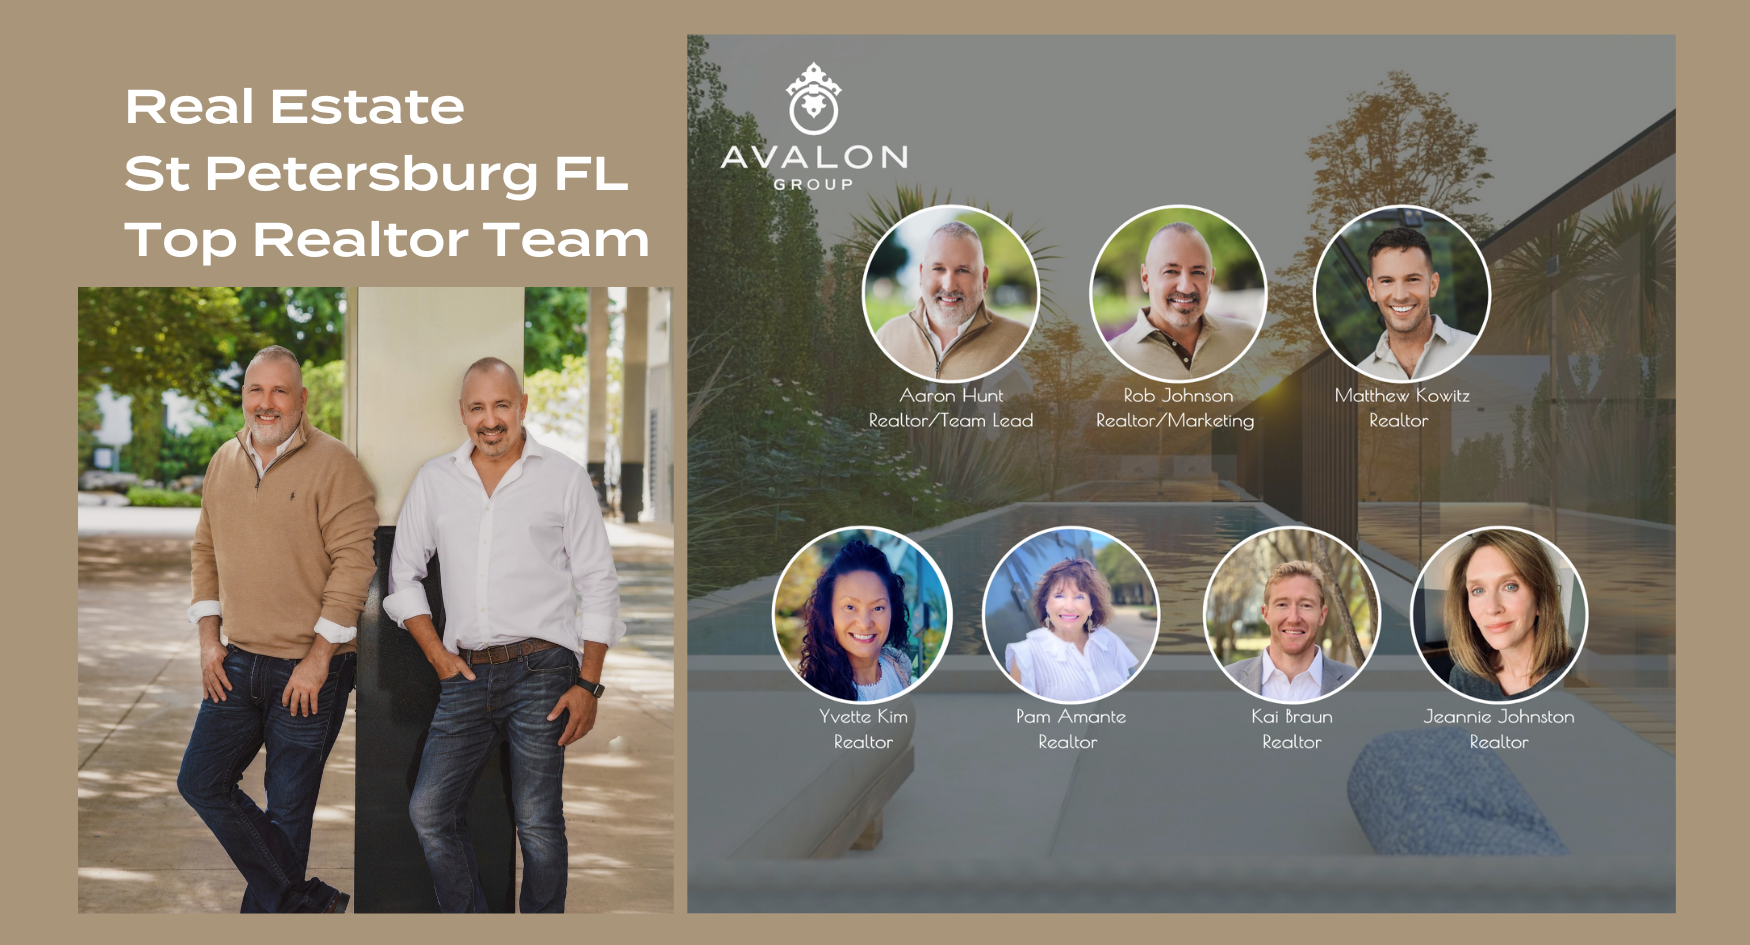 Real Estate St Petersburg FL cover photo shows the founders in one picture and all the team members in individual pictures that are round.